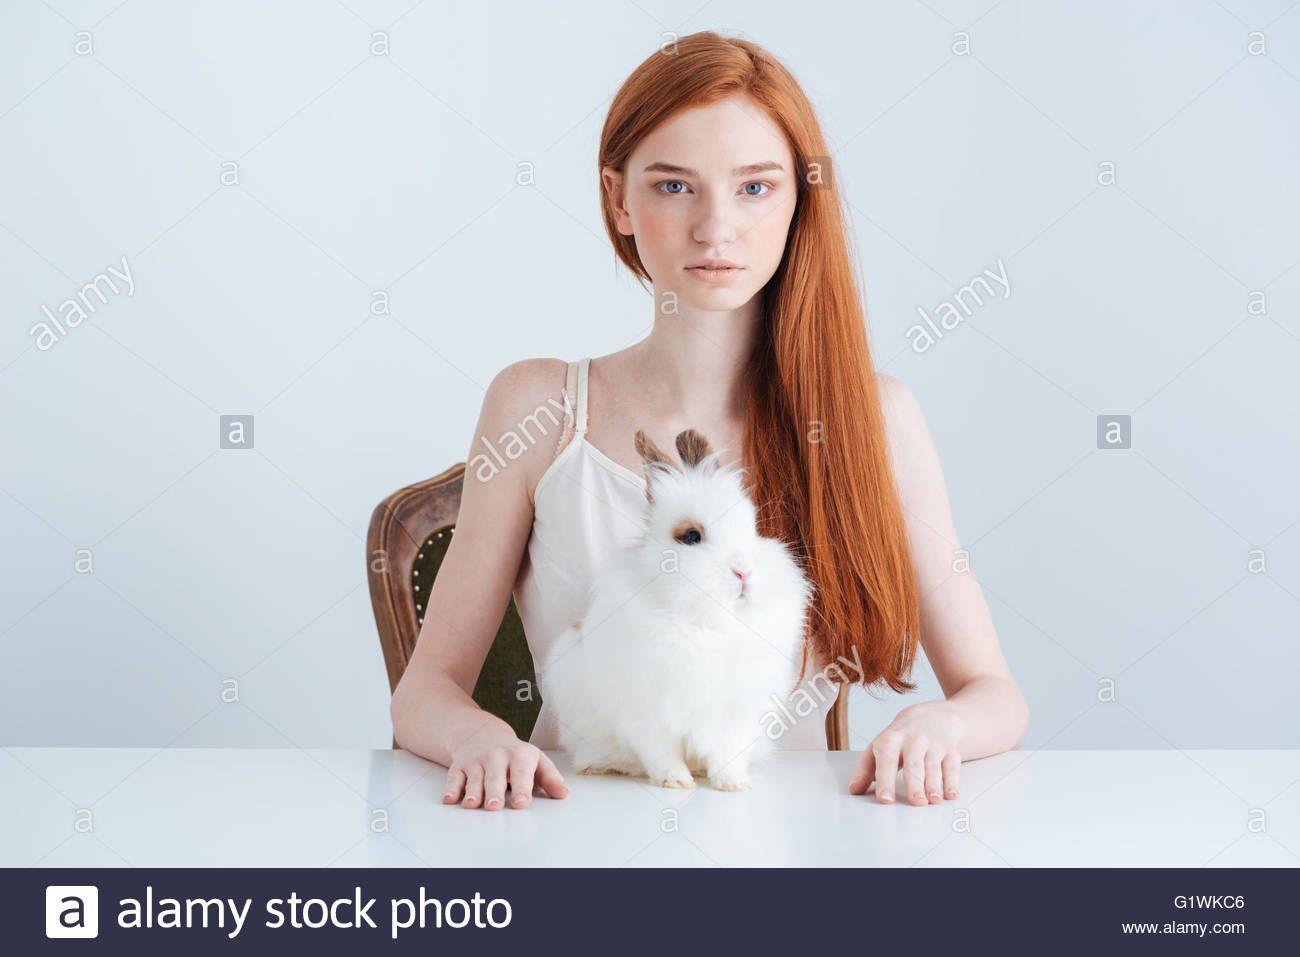 Redhead with rabbit picture